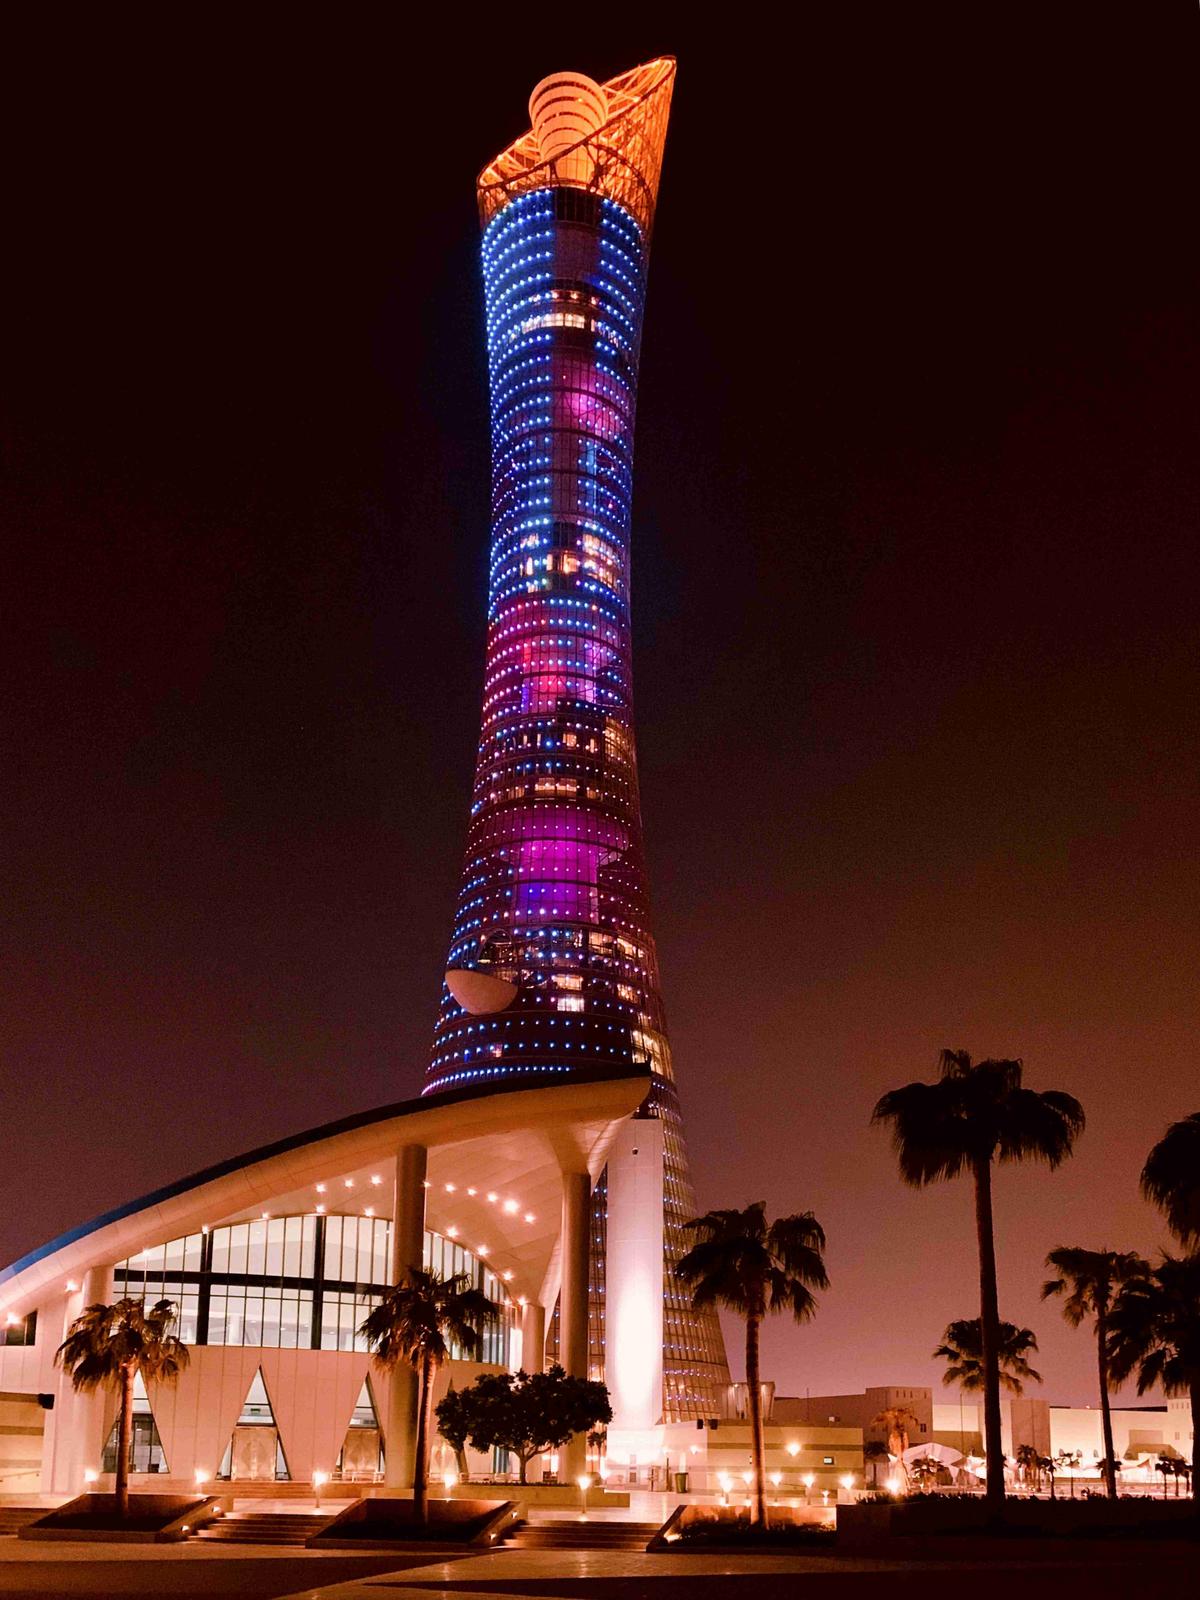 Illuminated Twisting Tower at Night with Palm Trees